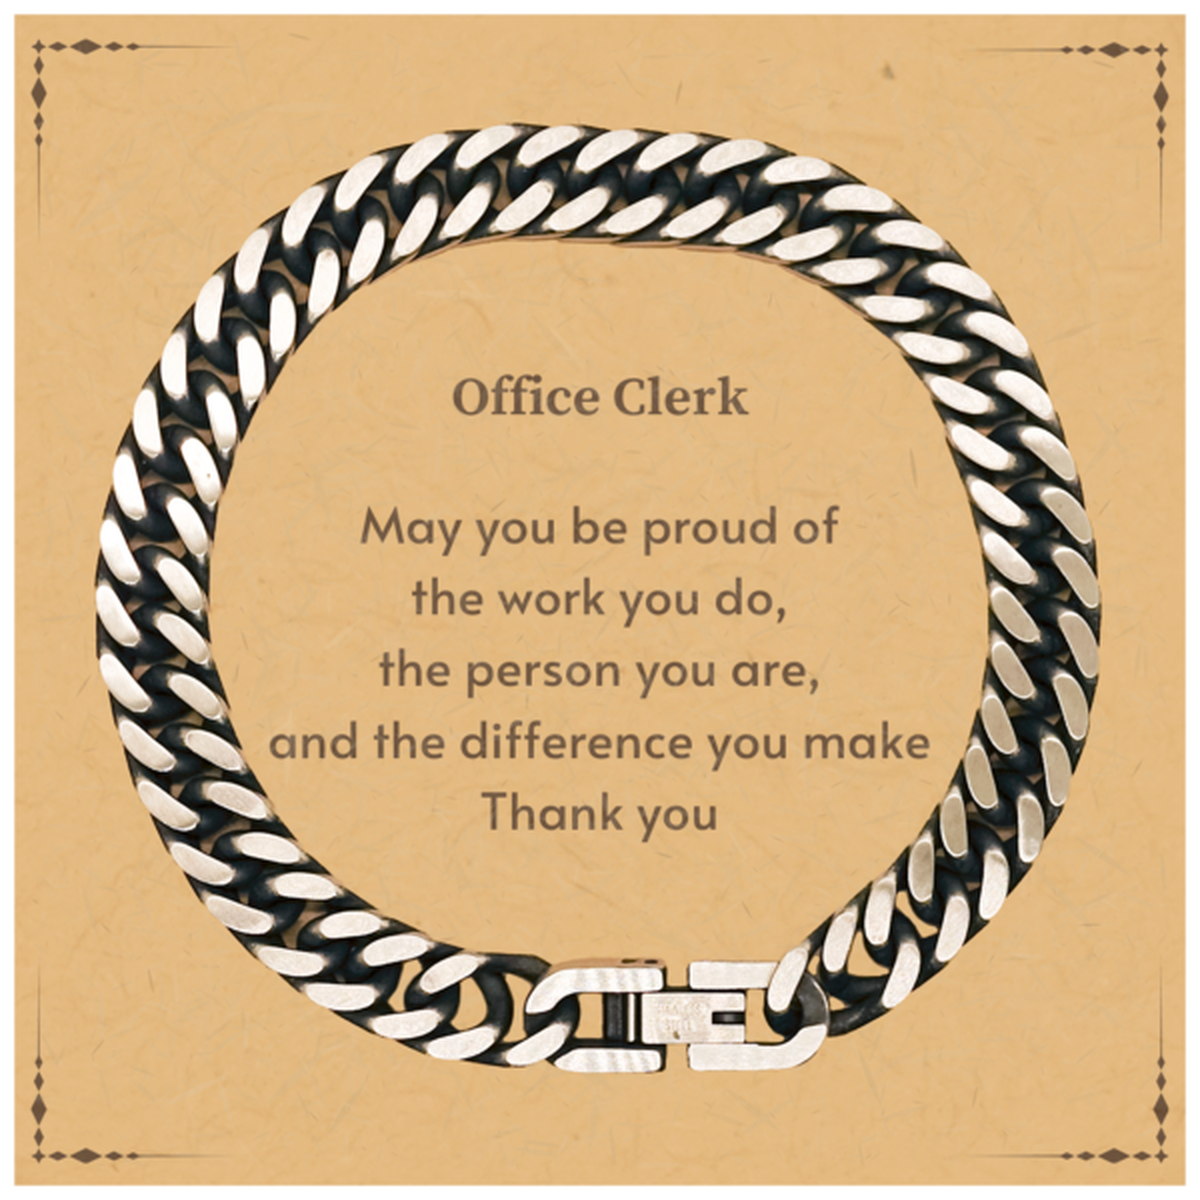 Heartwarming Cuban Link Chain Bracelet Retirement Coworkers Gifts for Office Clerk, Office Clerk May You be proud of the work you do, the person you are Gifts for Boss Men Women Friends